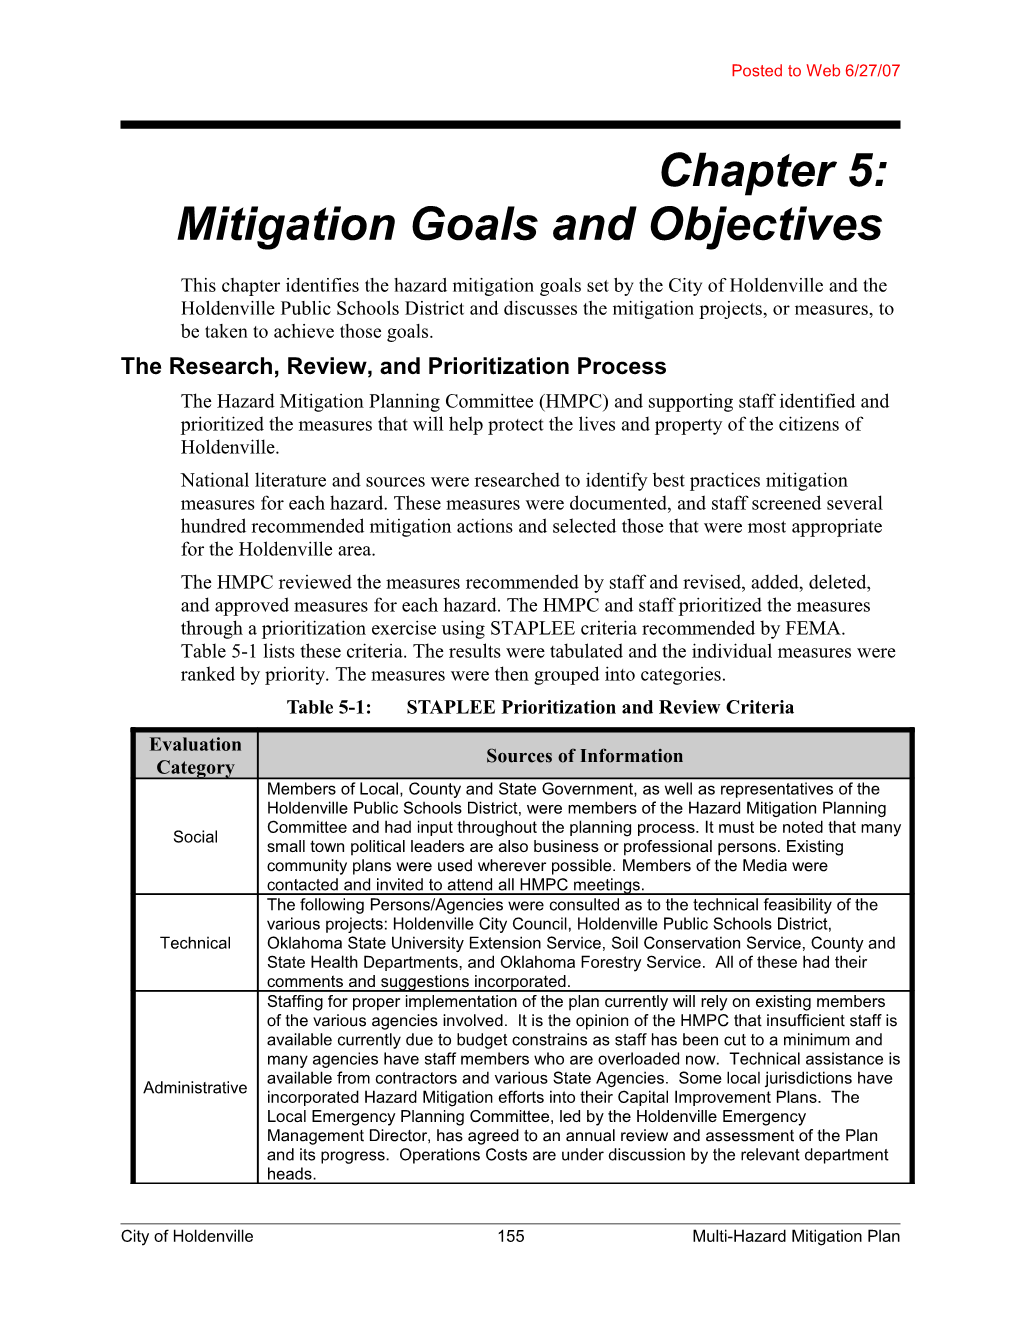 Chapter 5:Mitigation Goals and Objectives